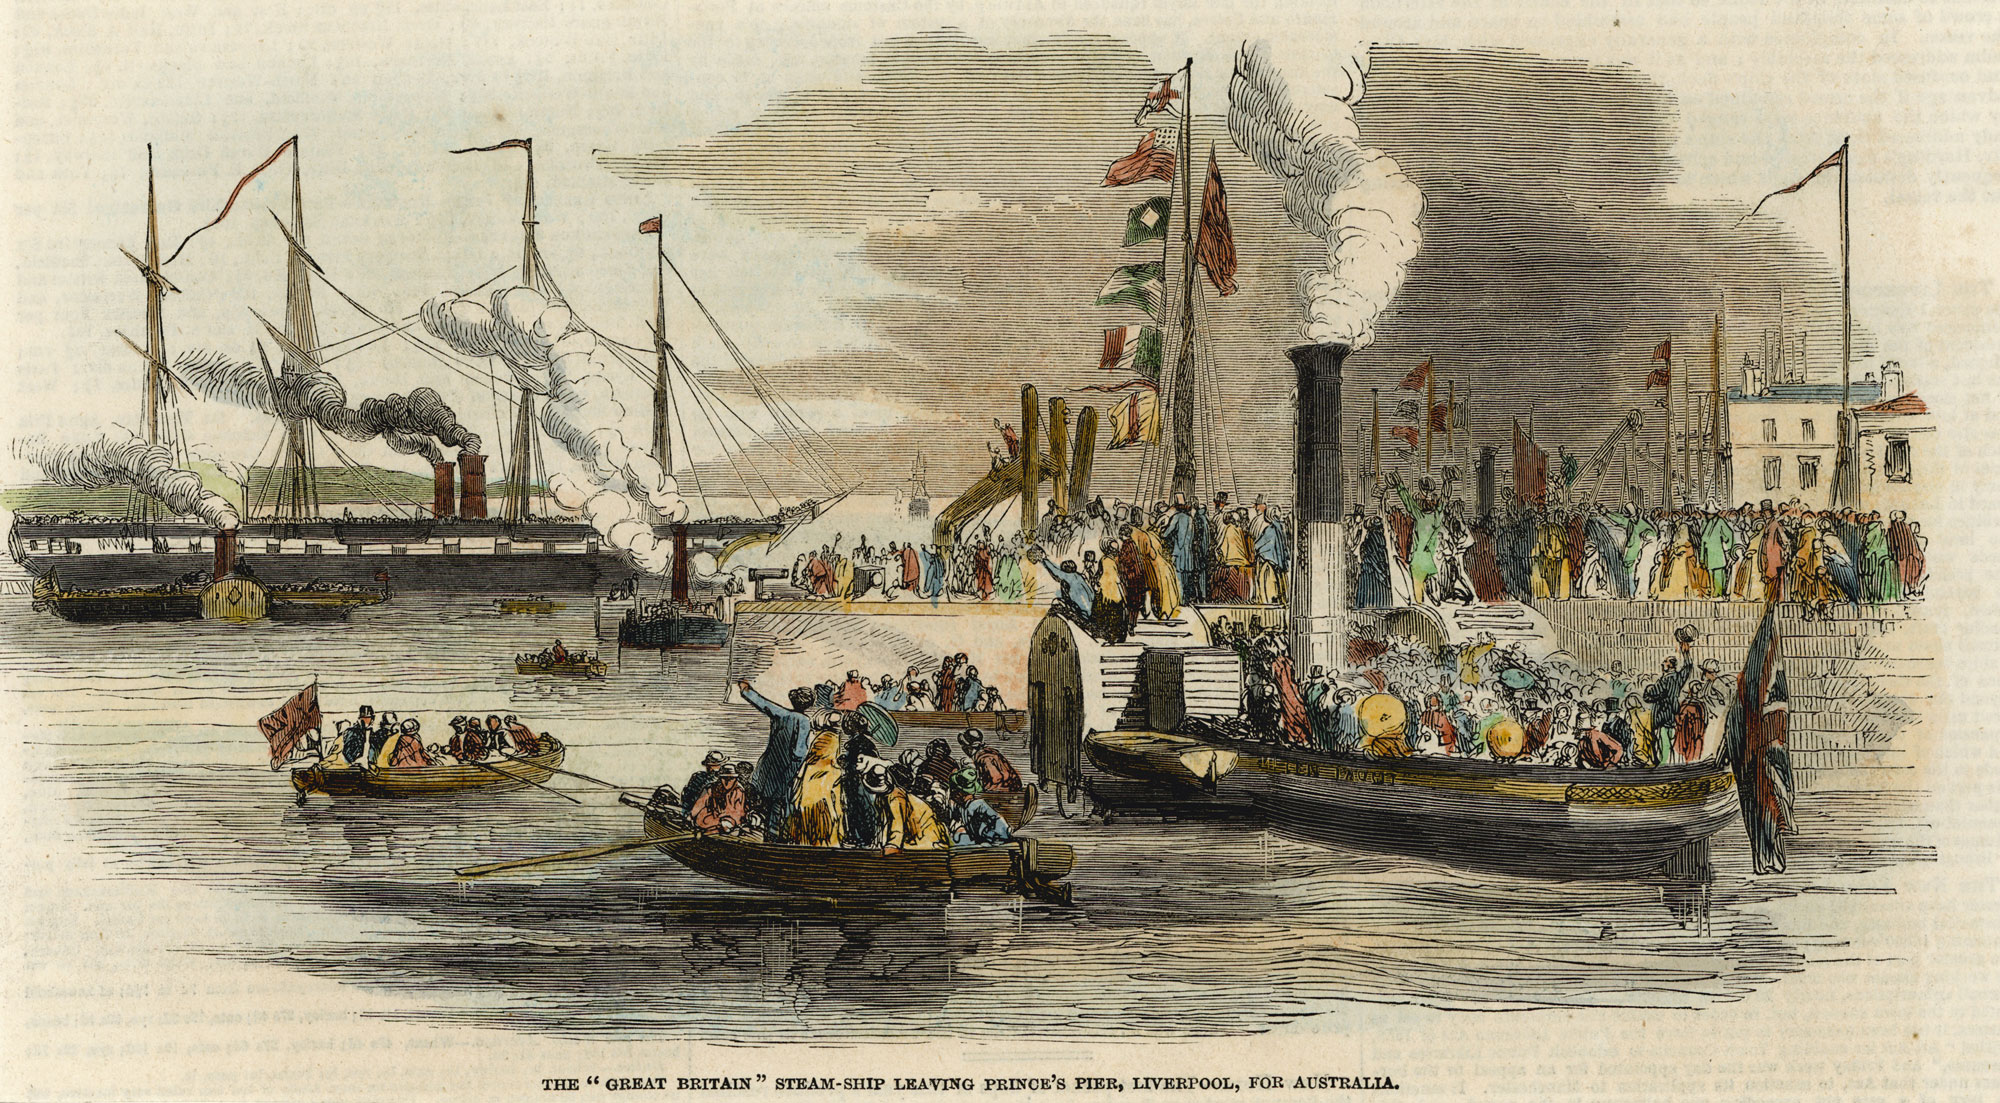 The SS Great Britain steam ship leaving Prince’s Pier, Liverpool, for Australia, 1852.